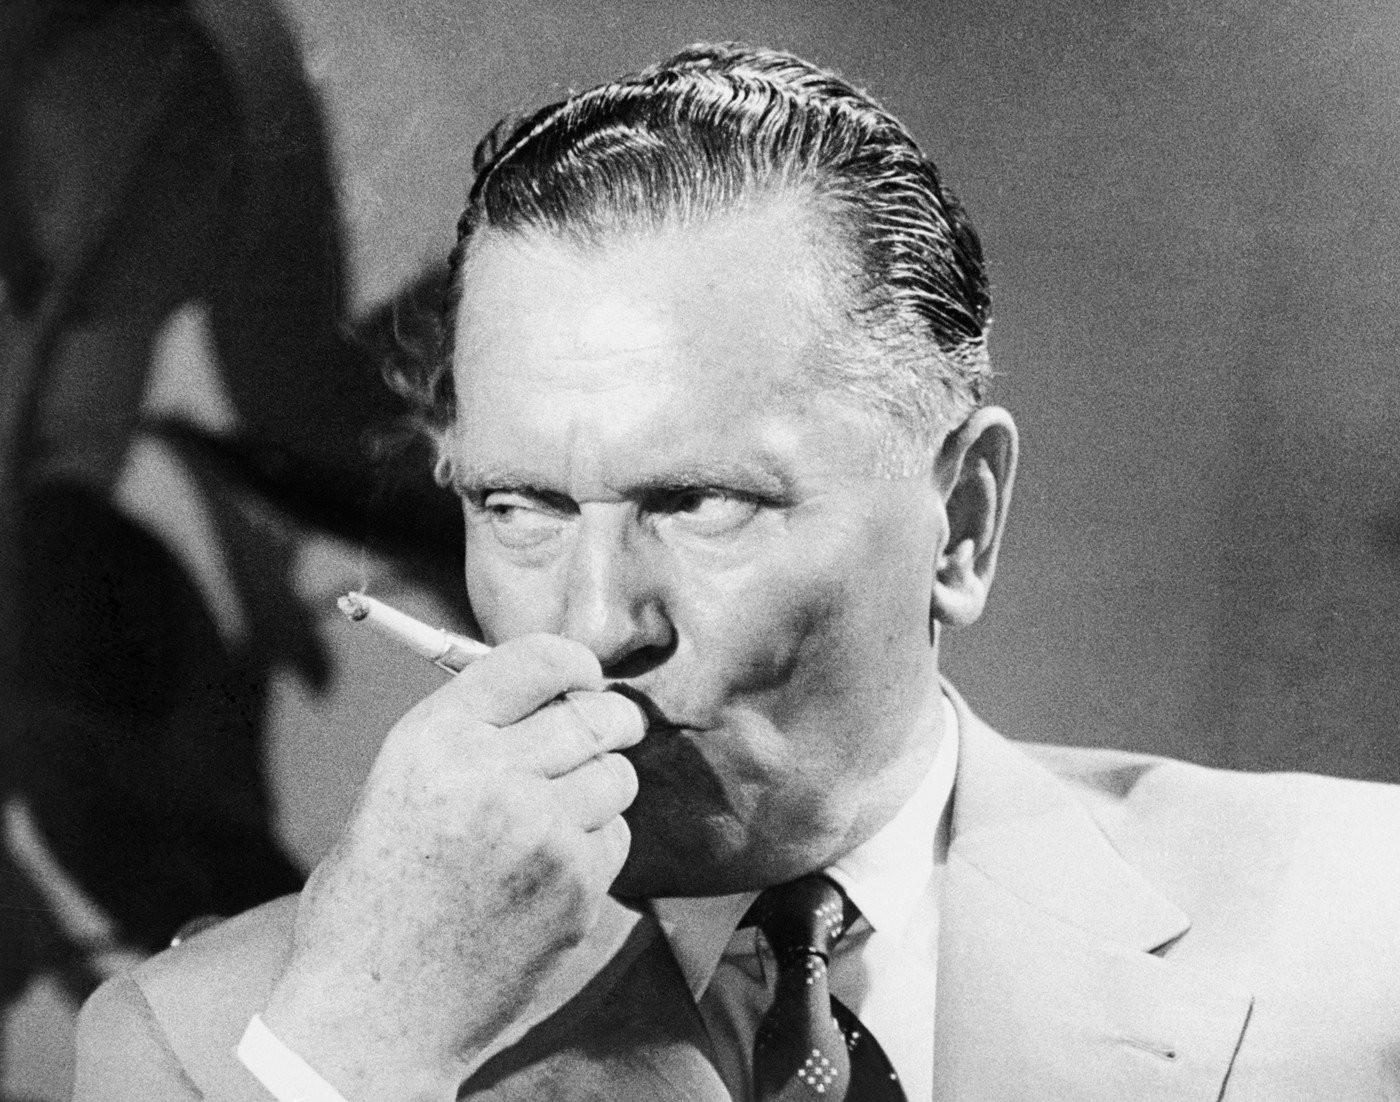 Original caption: Tito prepares for television. Brioni, Yugoslavia: Yugoslav president Josip Broz Tito takes time out for a smoke at his summer home in the Adriatic while playing host to CBS reporter Edward R. Murrow and company. Murrow was on hand to film an interview with the Yugoslav leader for use on his See It Now program Sunday, June 30th, to be followed by a discussion featuring a panel of experts. The informal atmosphere of the resort island was enhanced by the presence of Tito's wife, Jovanka, at the interview session., Image: 16470417, License: Rights-managed, Restrictions: , Model Release: no, Credit line: Profimedia, Corbis